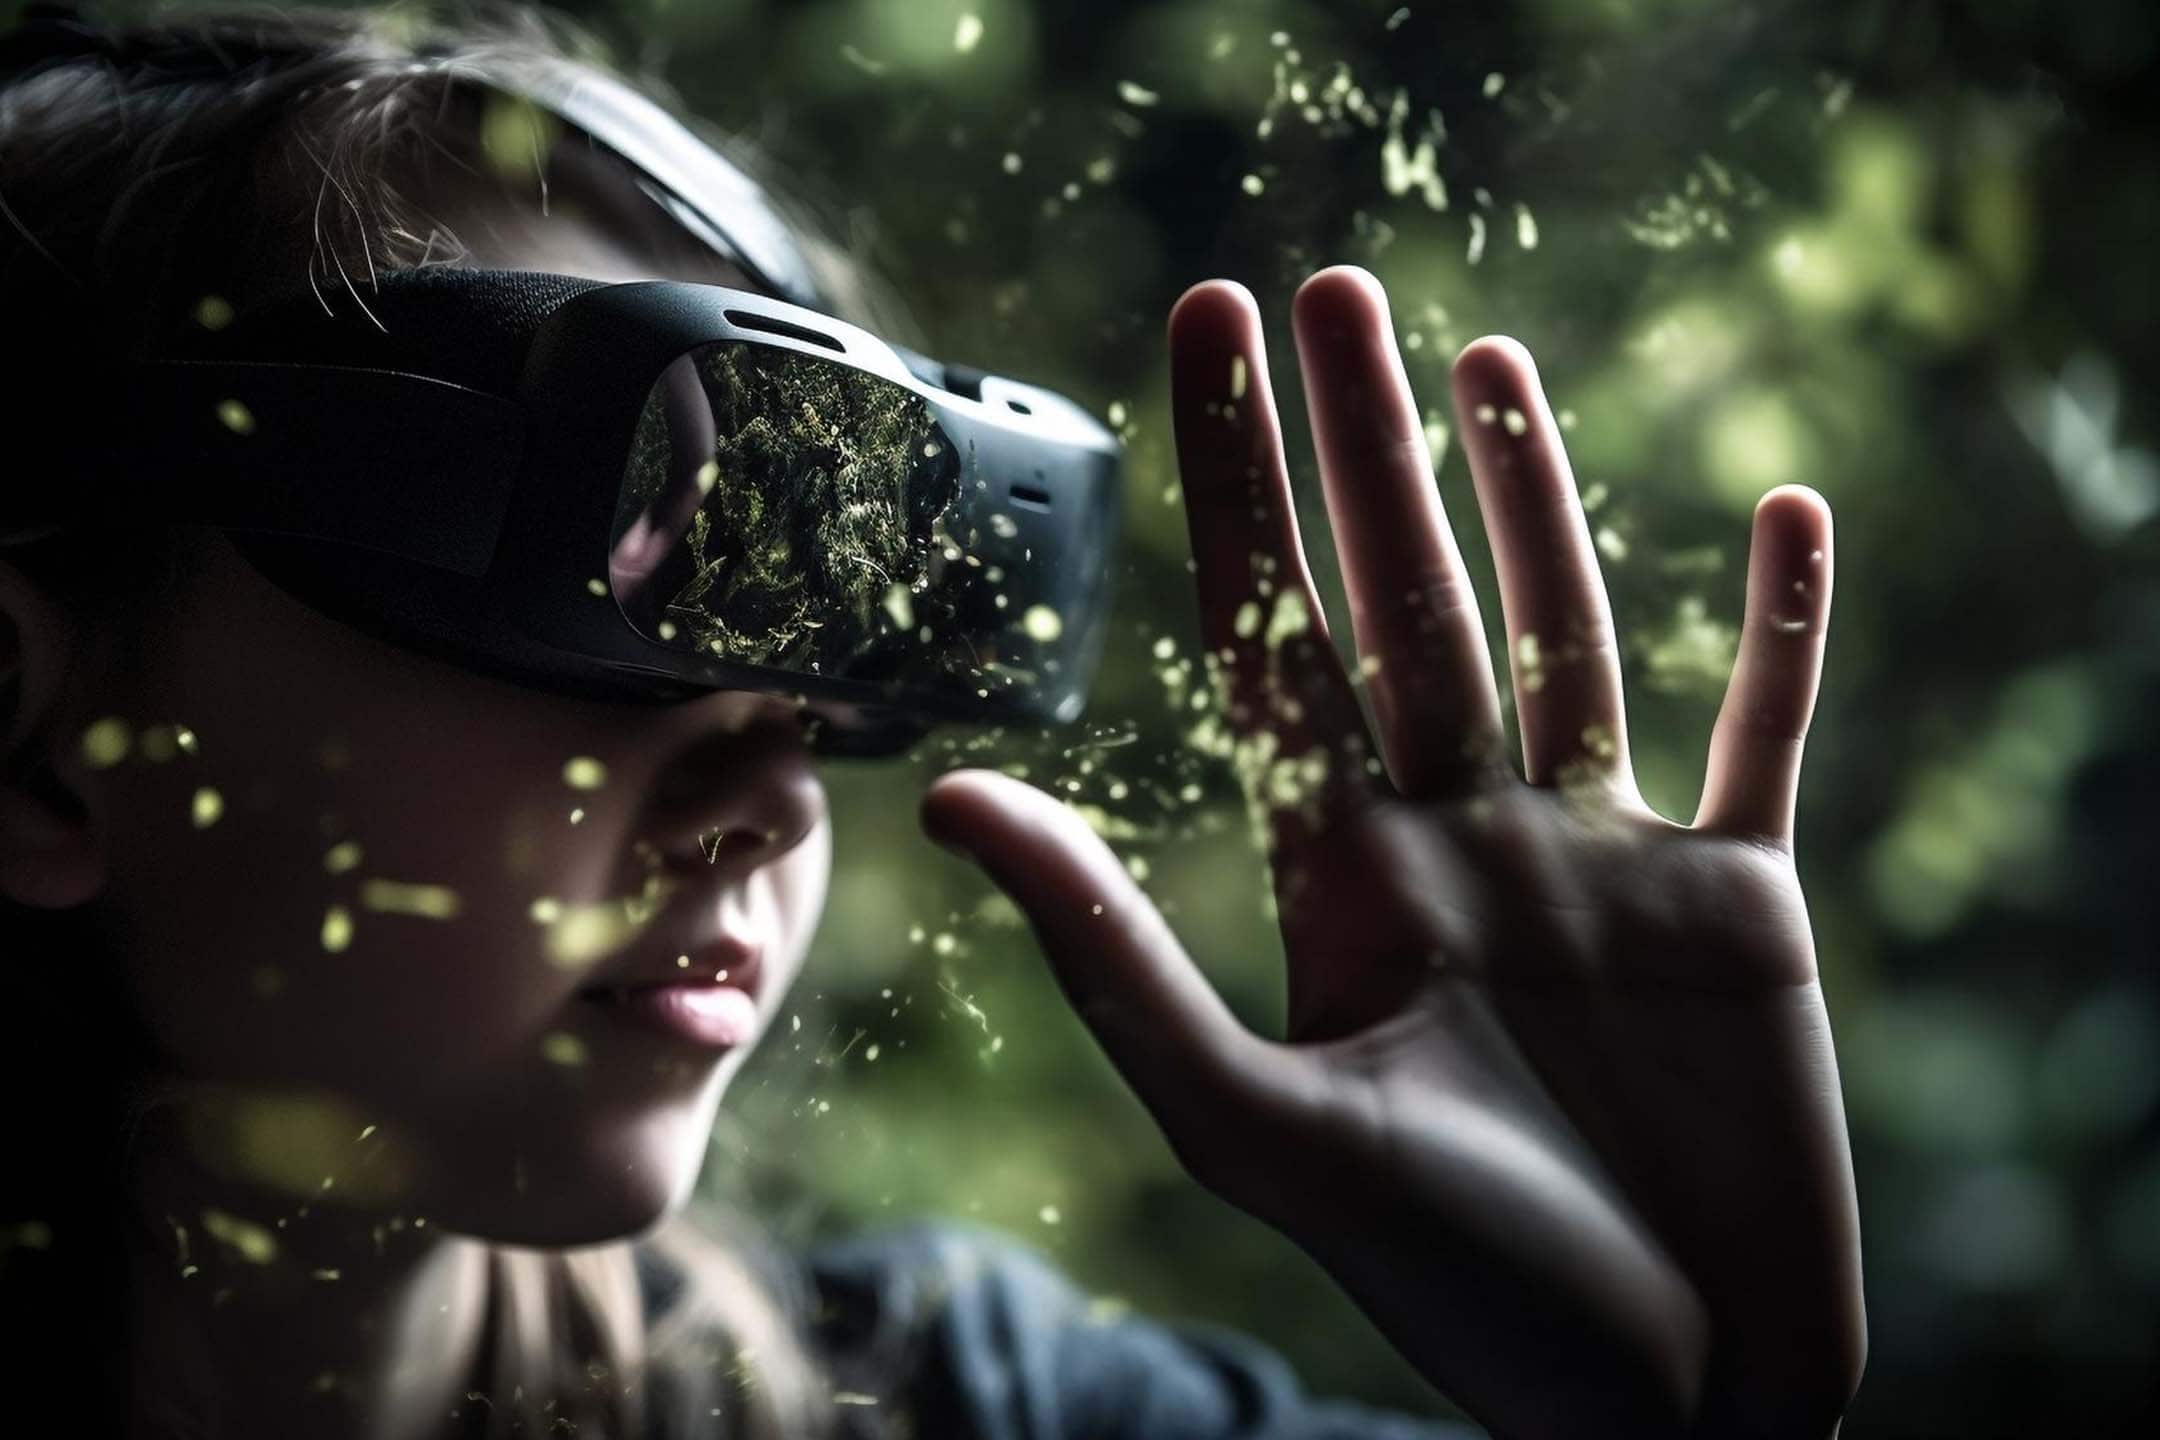 Young person experiencing a virtual reality forest environment, reaching out to touch the illuminated particles.